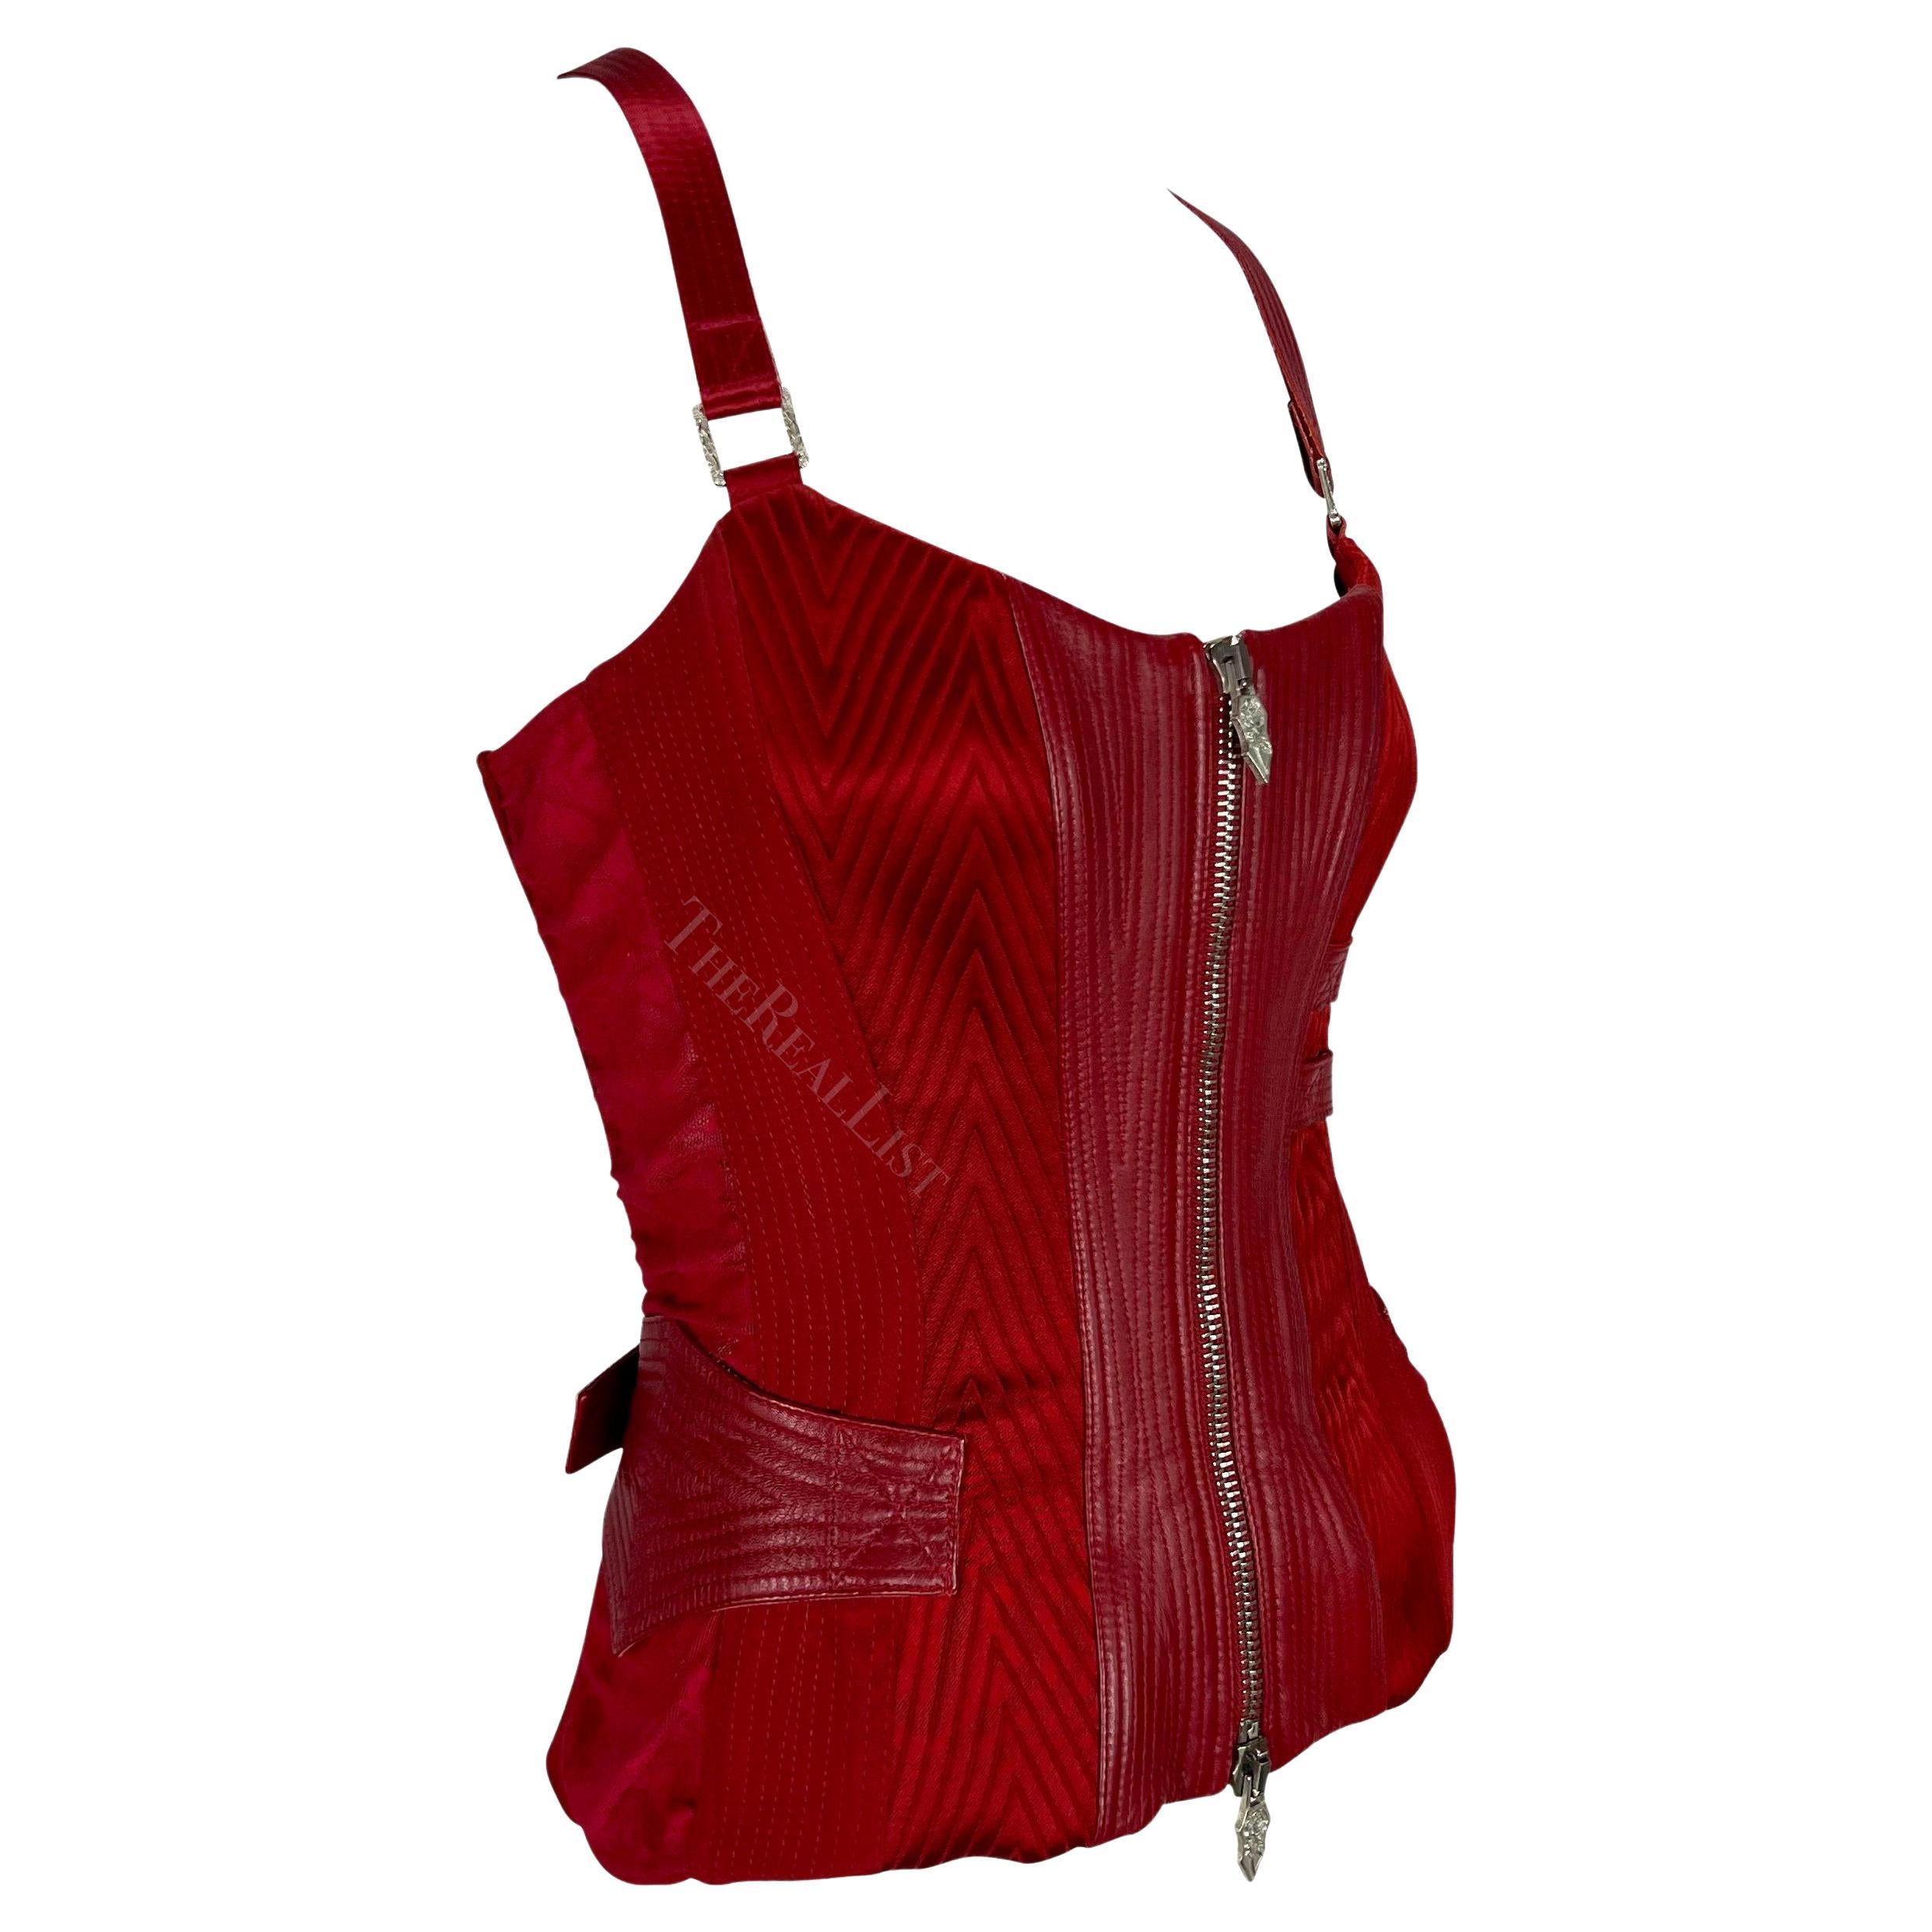 F/W 2003 Versace by Donatella Versace Red Quilted Leather Runway Corset Top 7